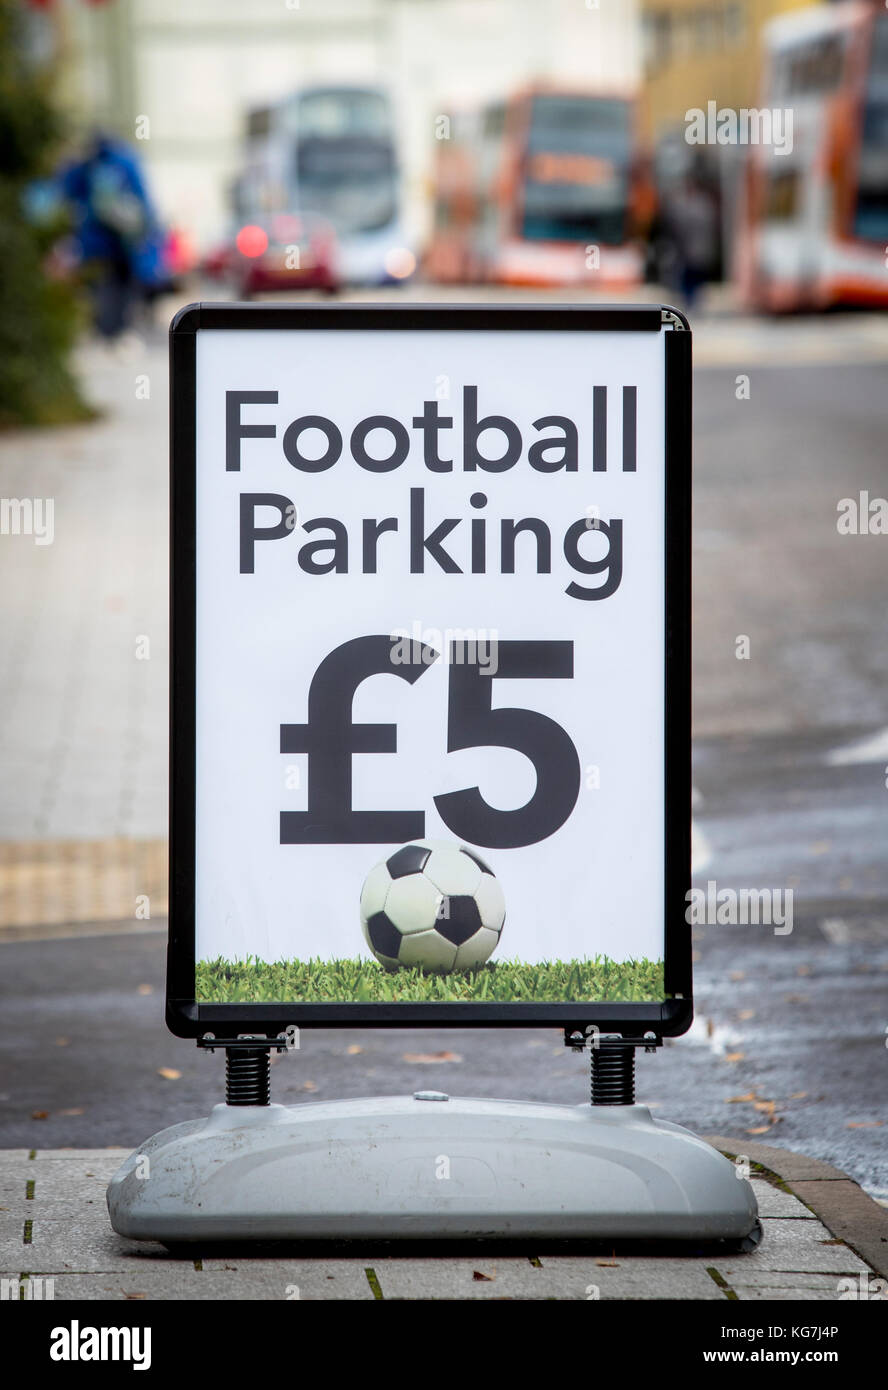 Match day football parking sign Stock Photo